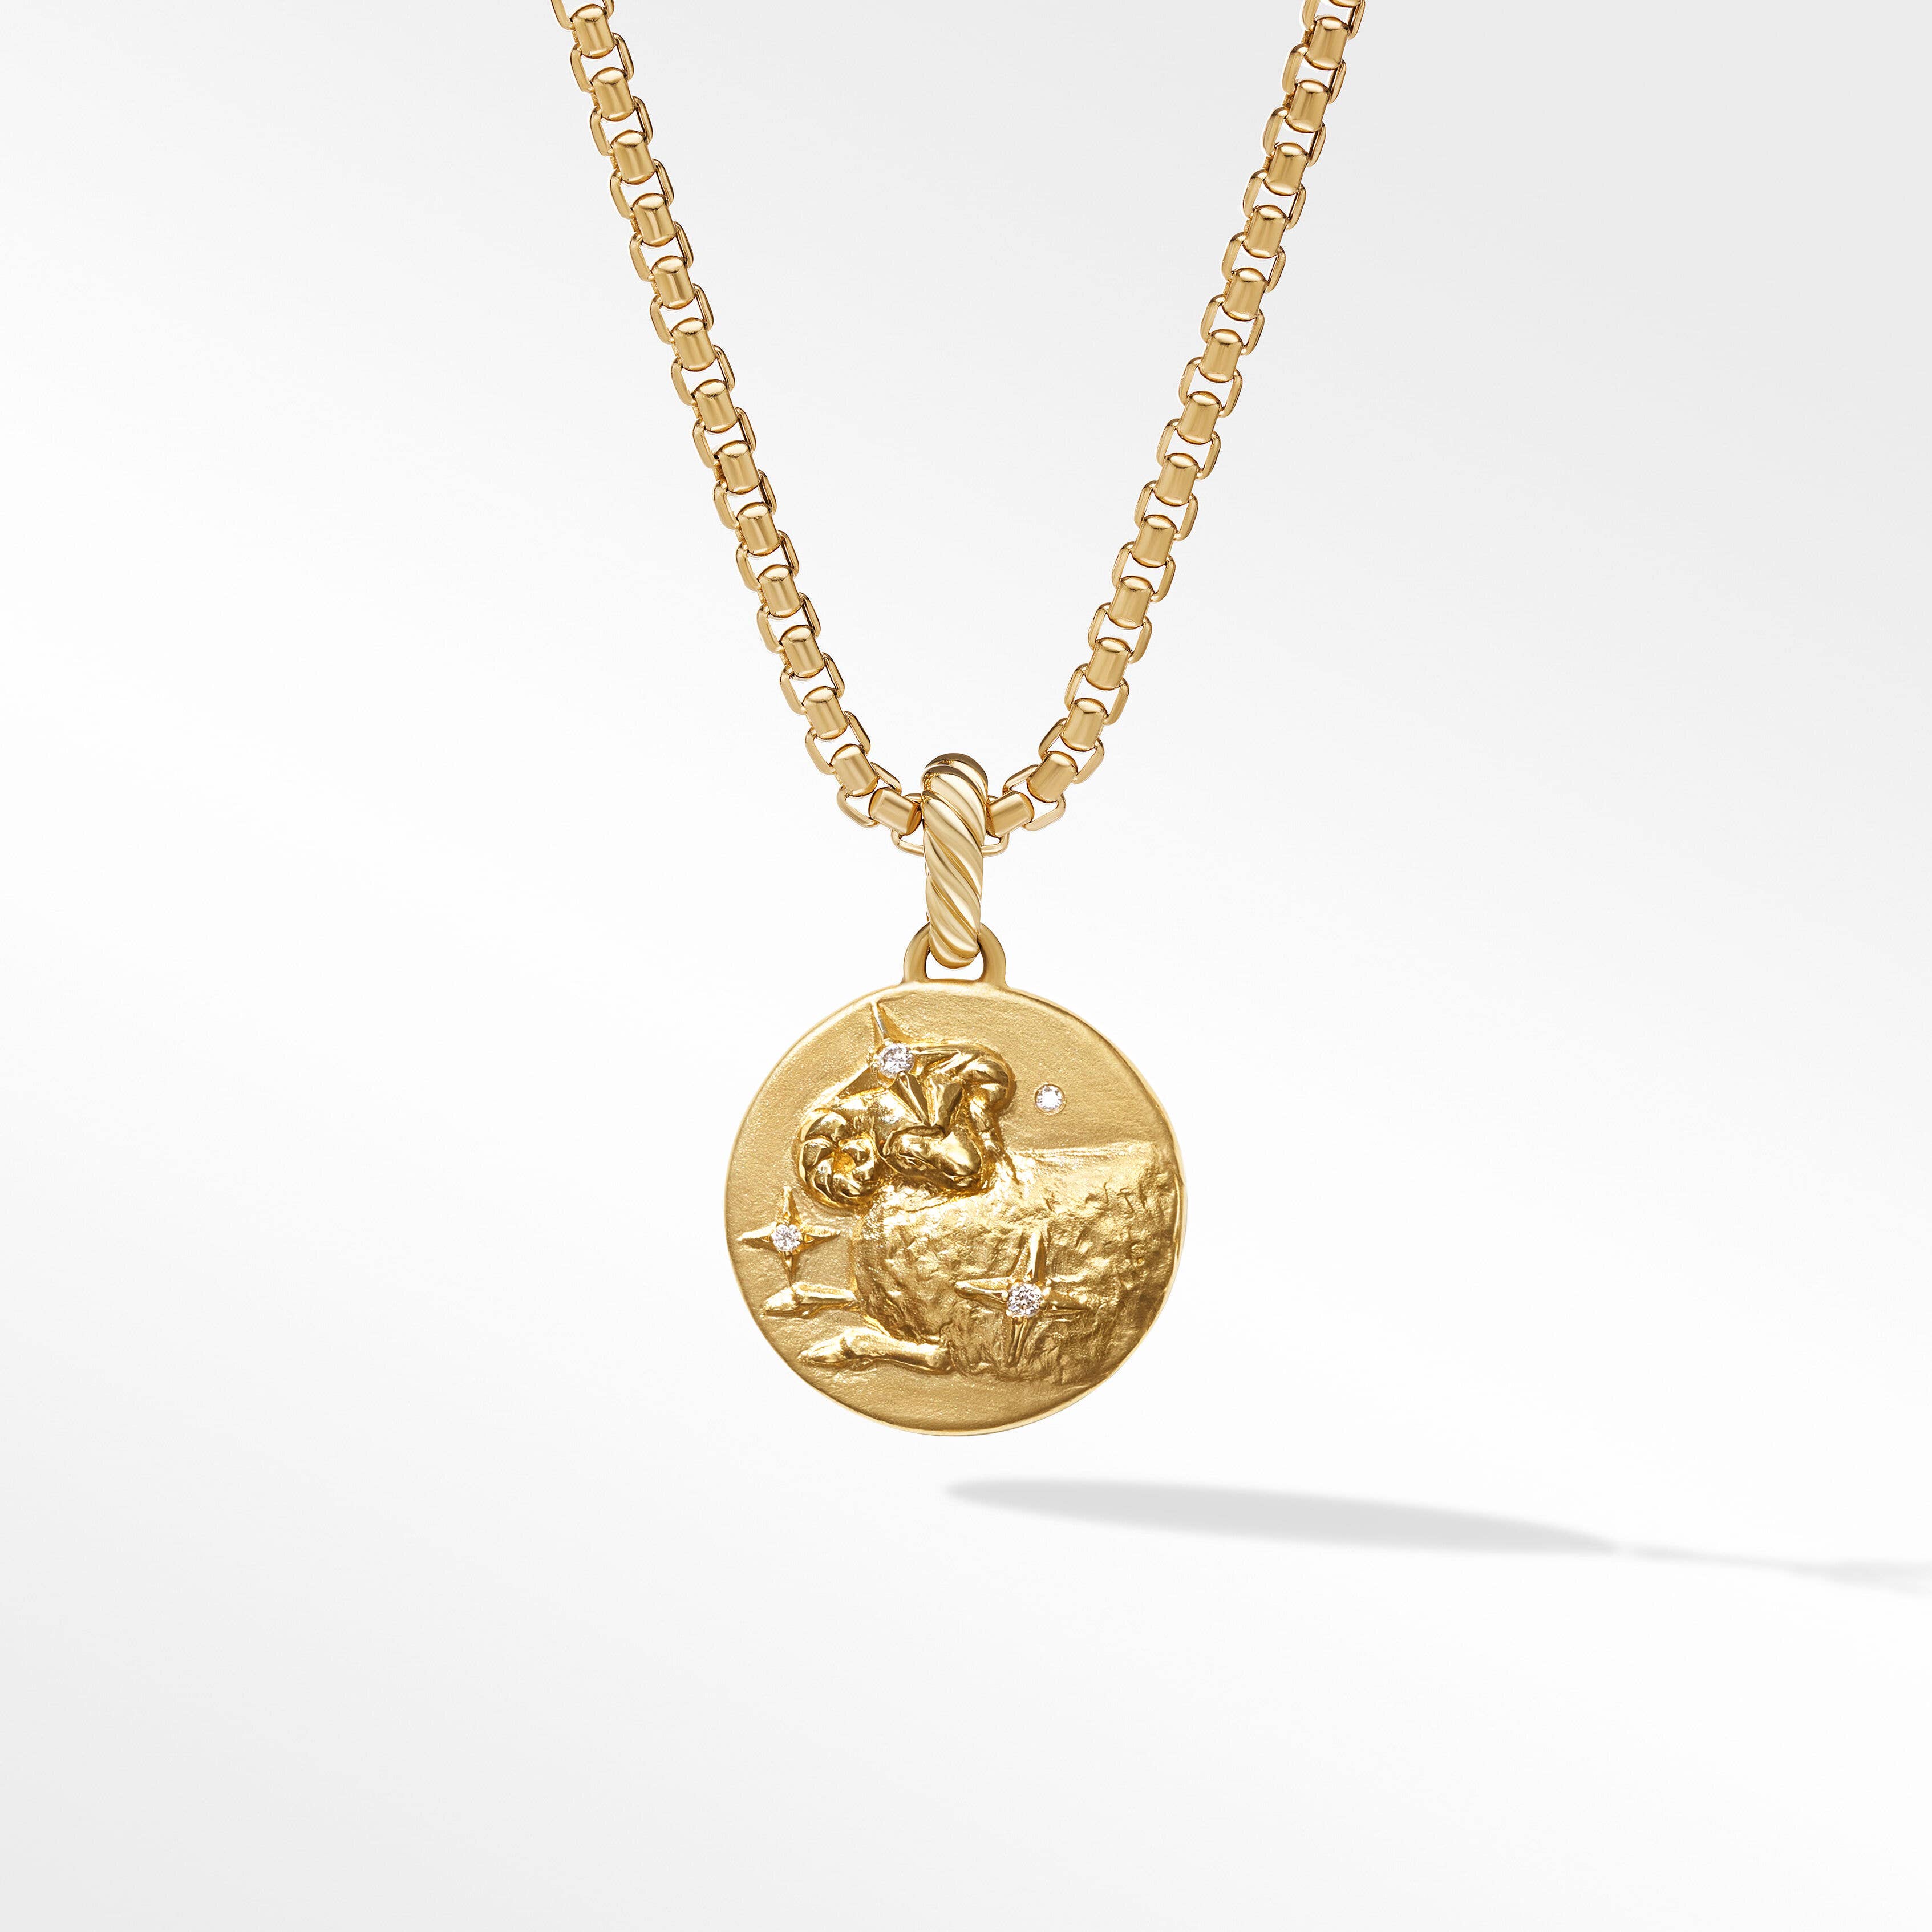 Aries Amulet in 18K Yellow Gold with Diamonds